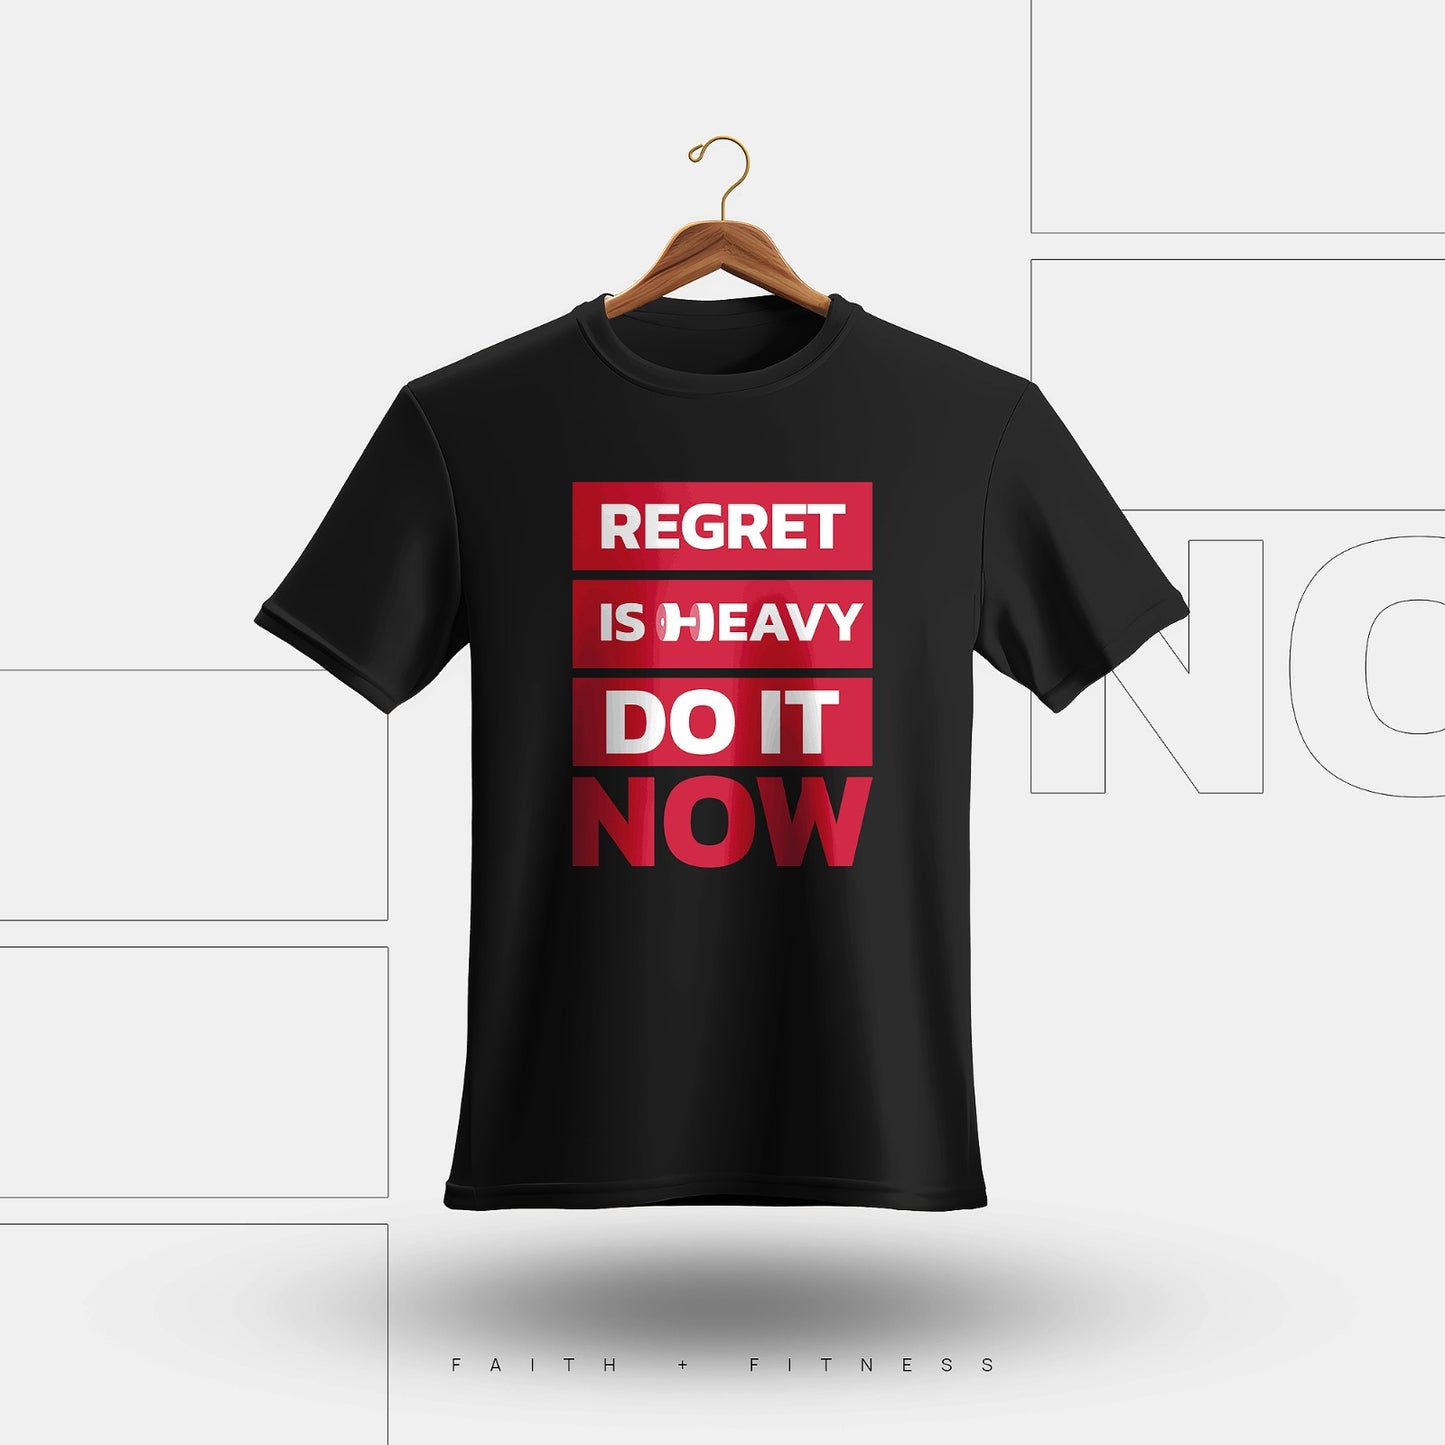 Black Red Regret is Heavy do it Now Round Tee